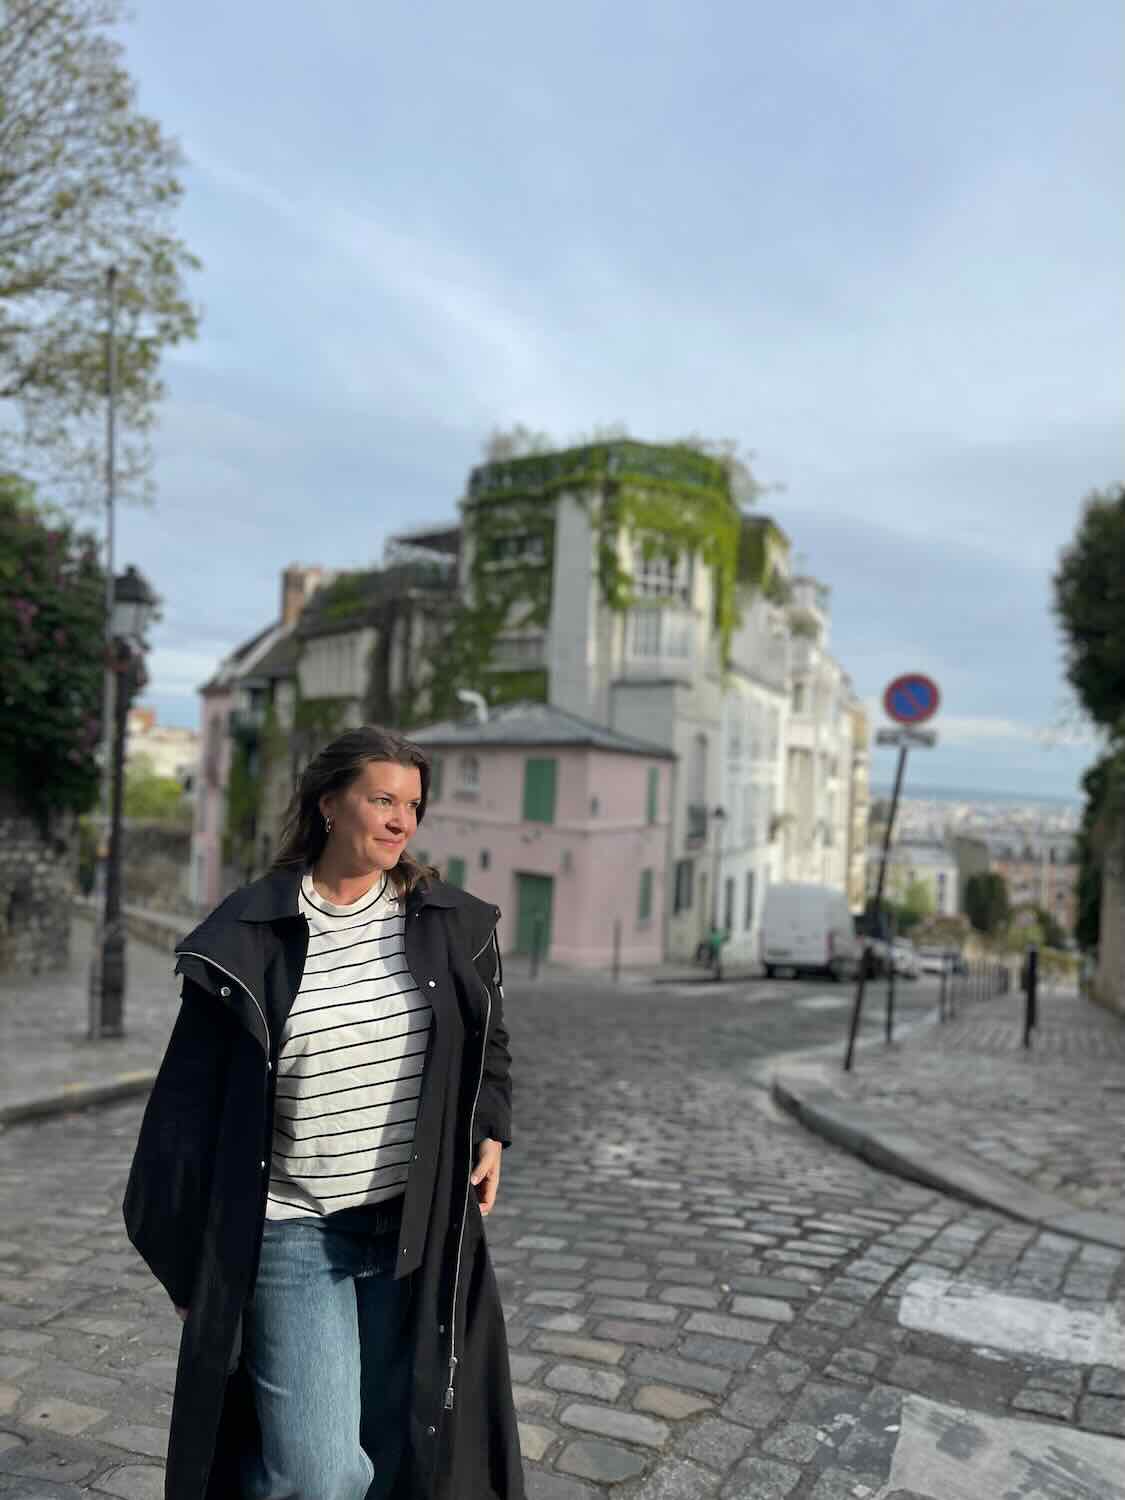  a woman walking on a quaint cobblestone street in the Montmartre neighborhood. The street is flanked by charming, pastel-colored buildings covered in greenery. The woman is dressed casually in jeans and a striped top, with a long black coat, and appears relaxed and content, embodying the solo traveler exploring Paris.